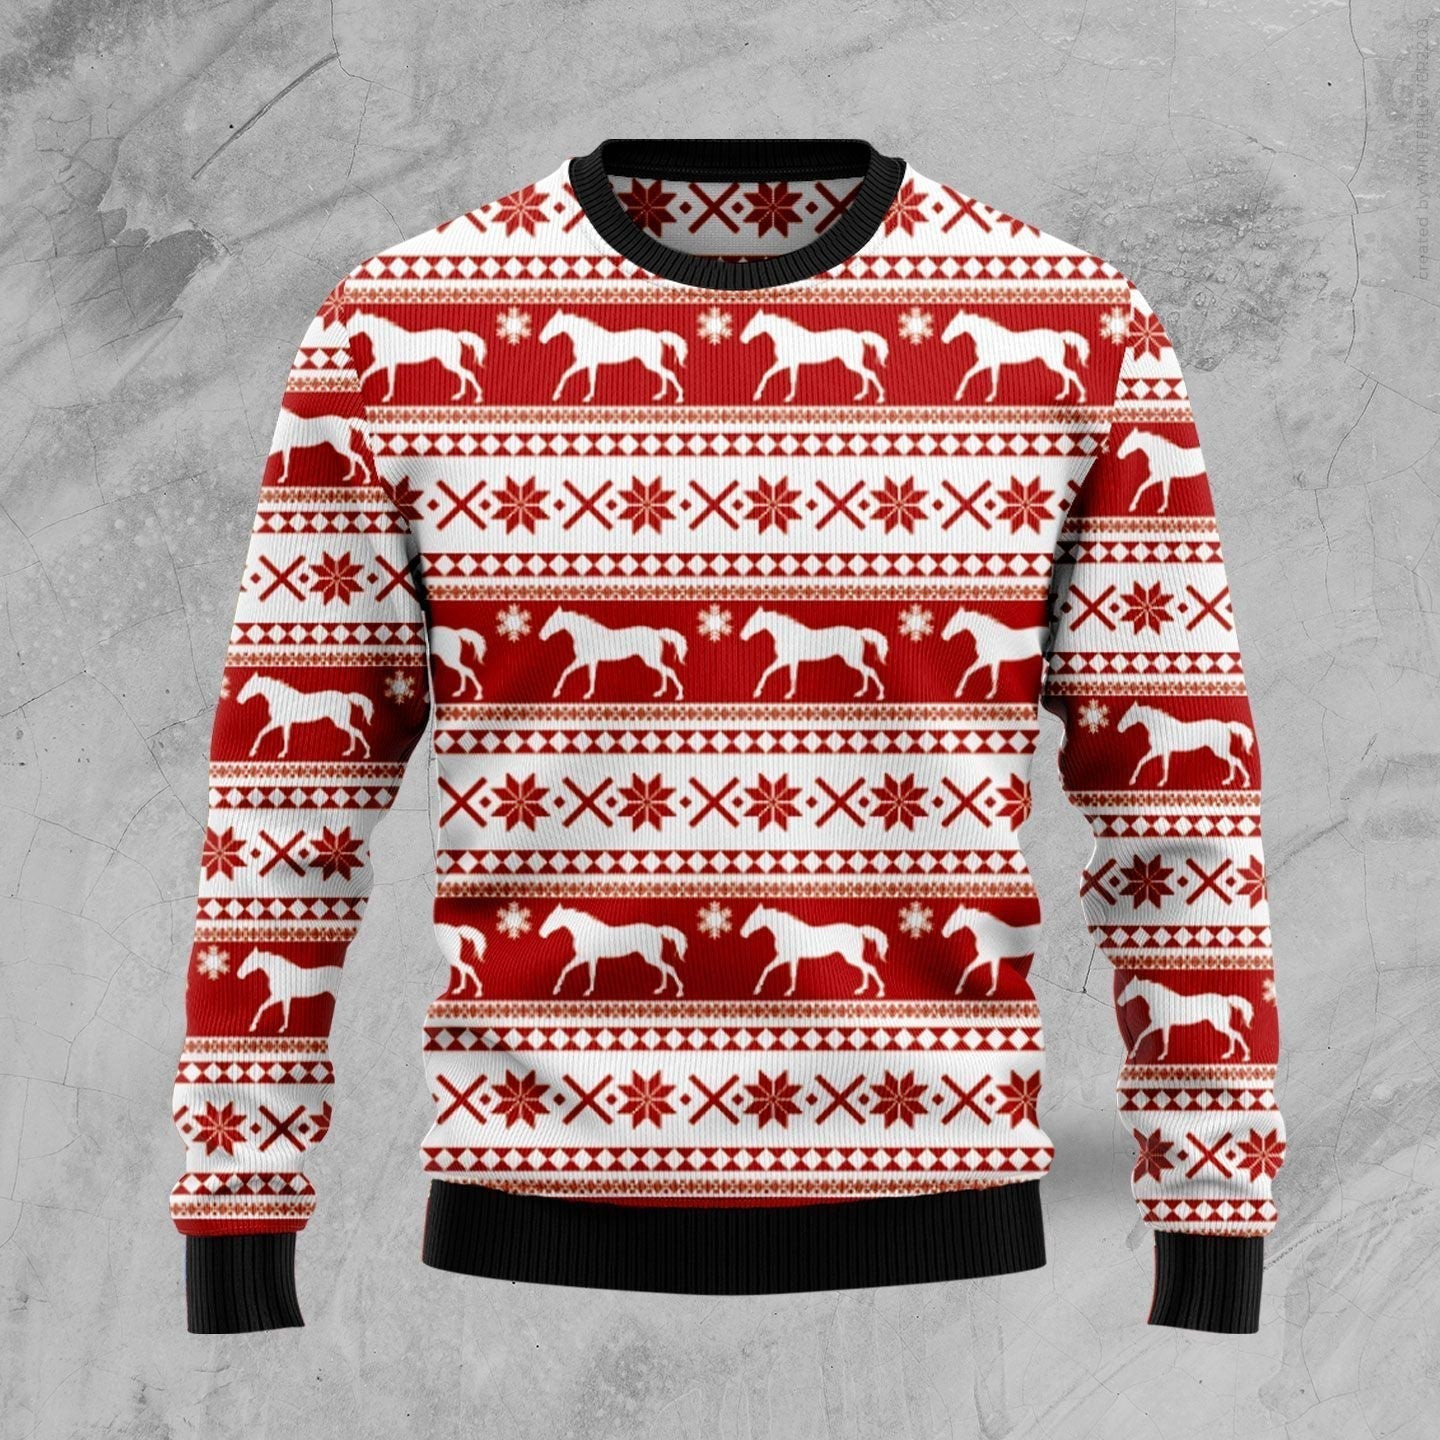 Amazing Horse Ugly Christmas Sweater Ugly Sweater For Men Women, Holiday Sweater